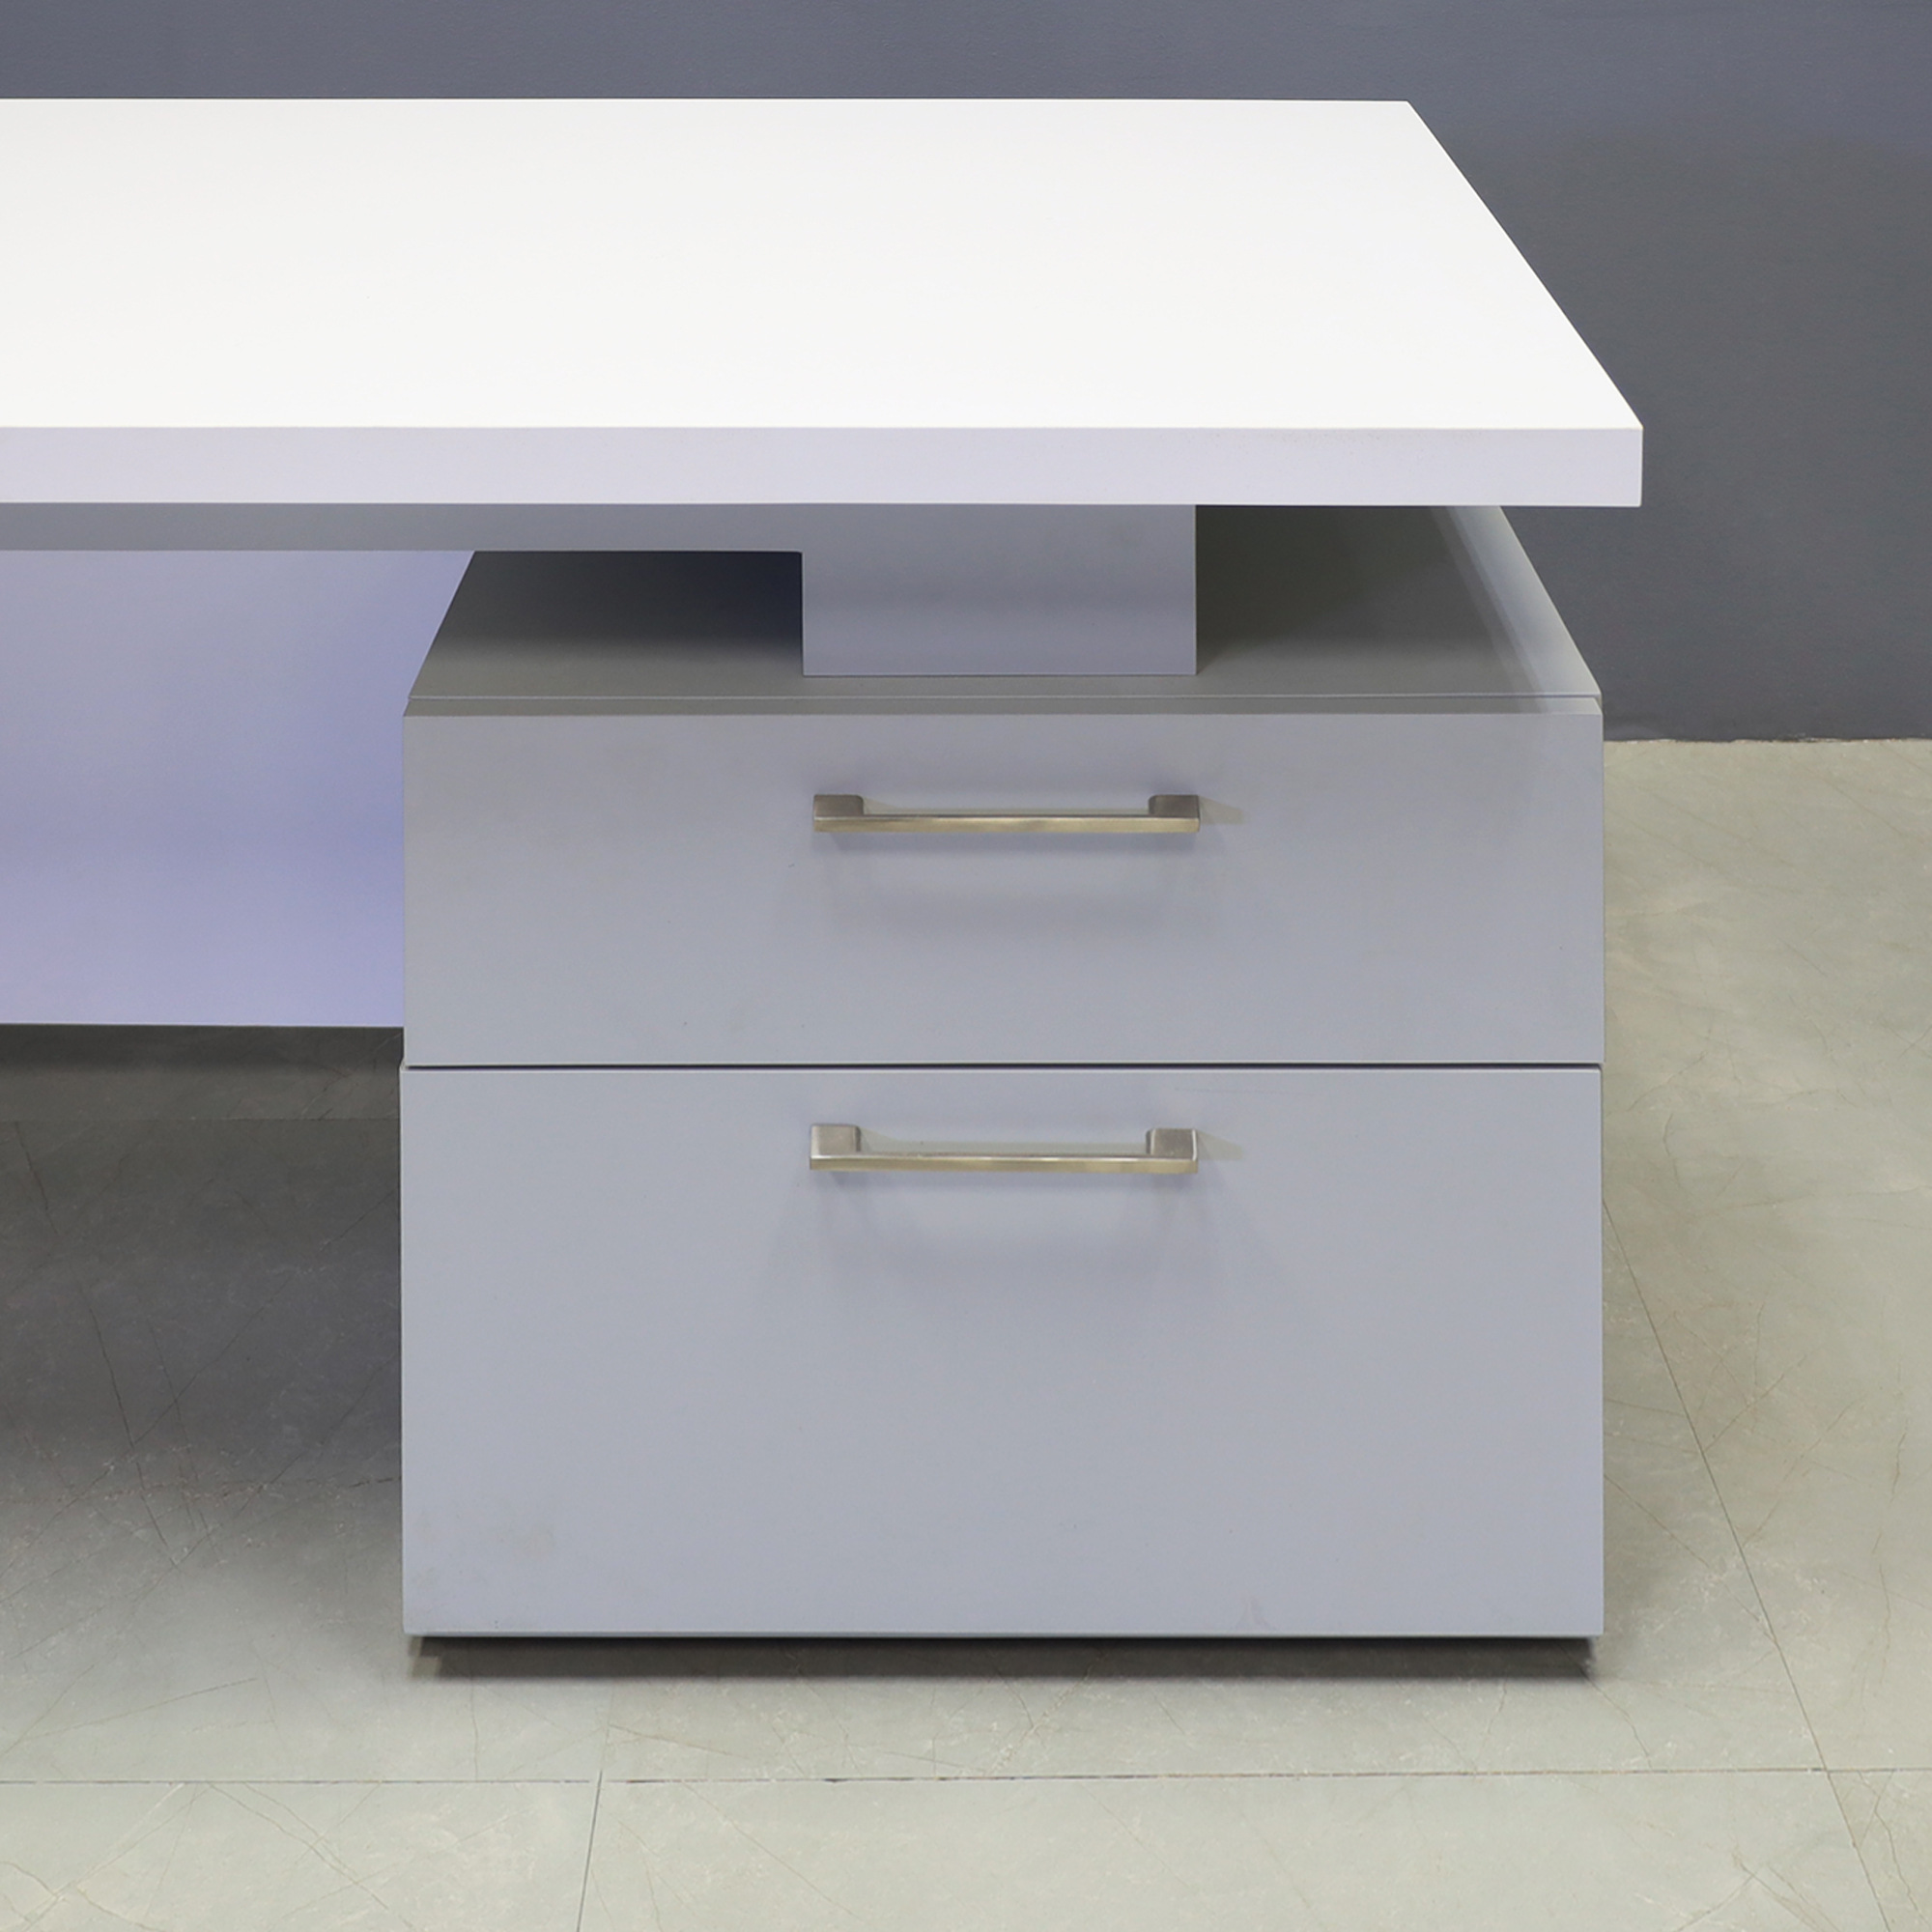 72-inch Avenue Straight Executive Desk in white matte laminate top and privacy panel, and light gray pvc base & storage on the right side when sitting, shown here.